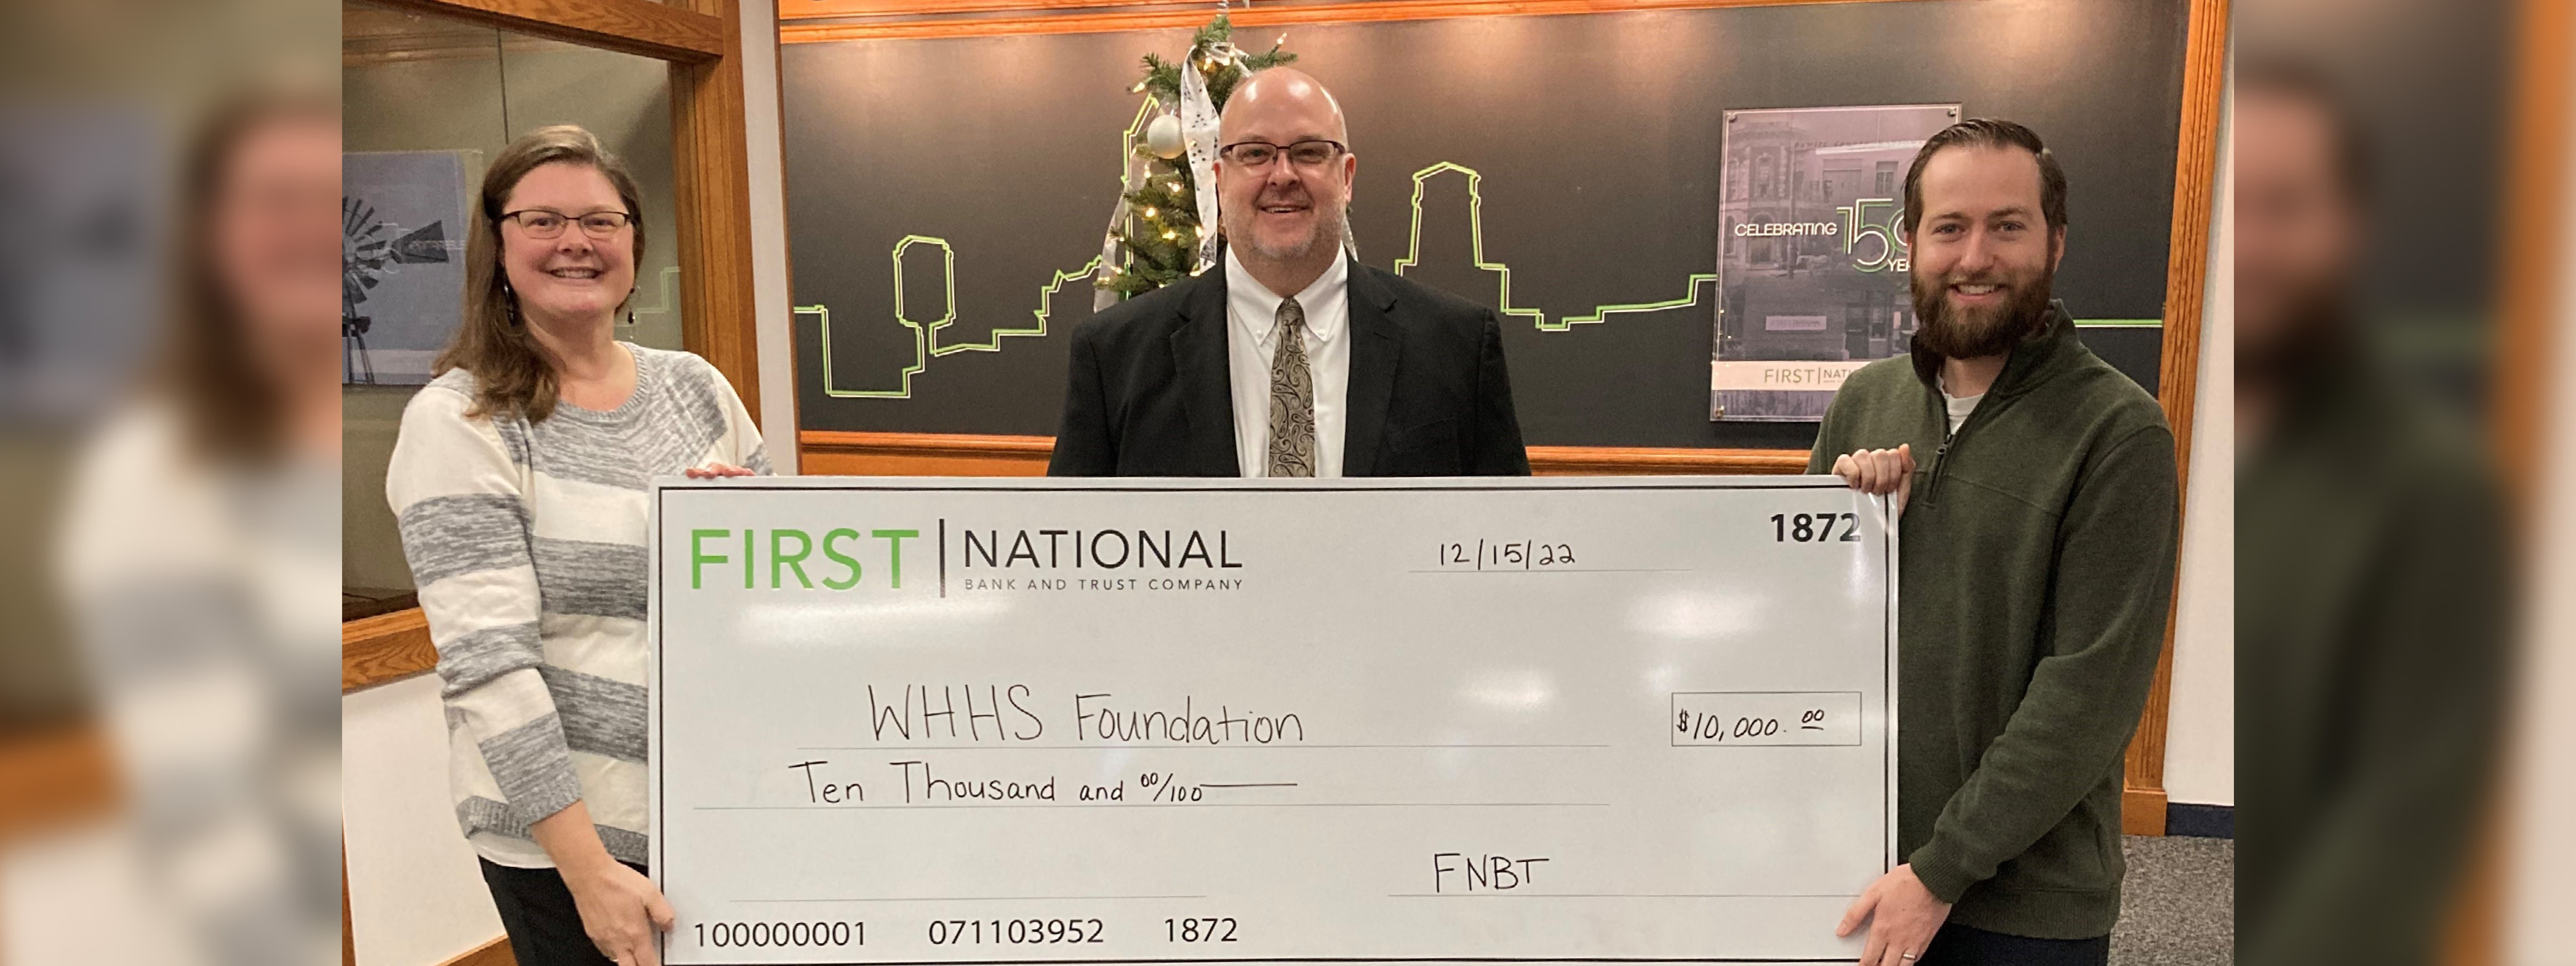 WHHS Foundation receiving check from FNBT employees